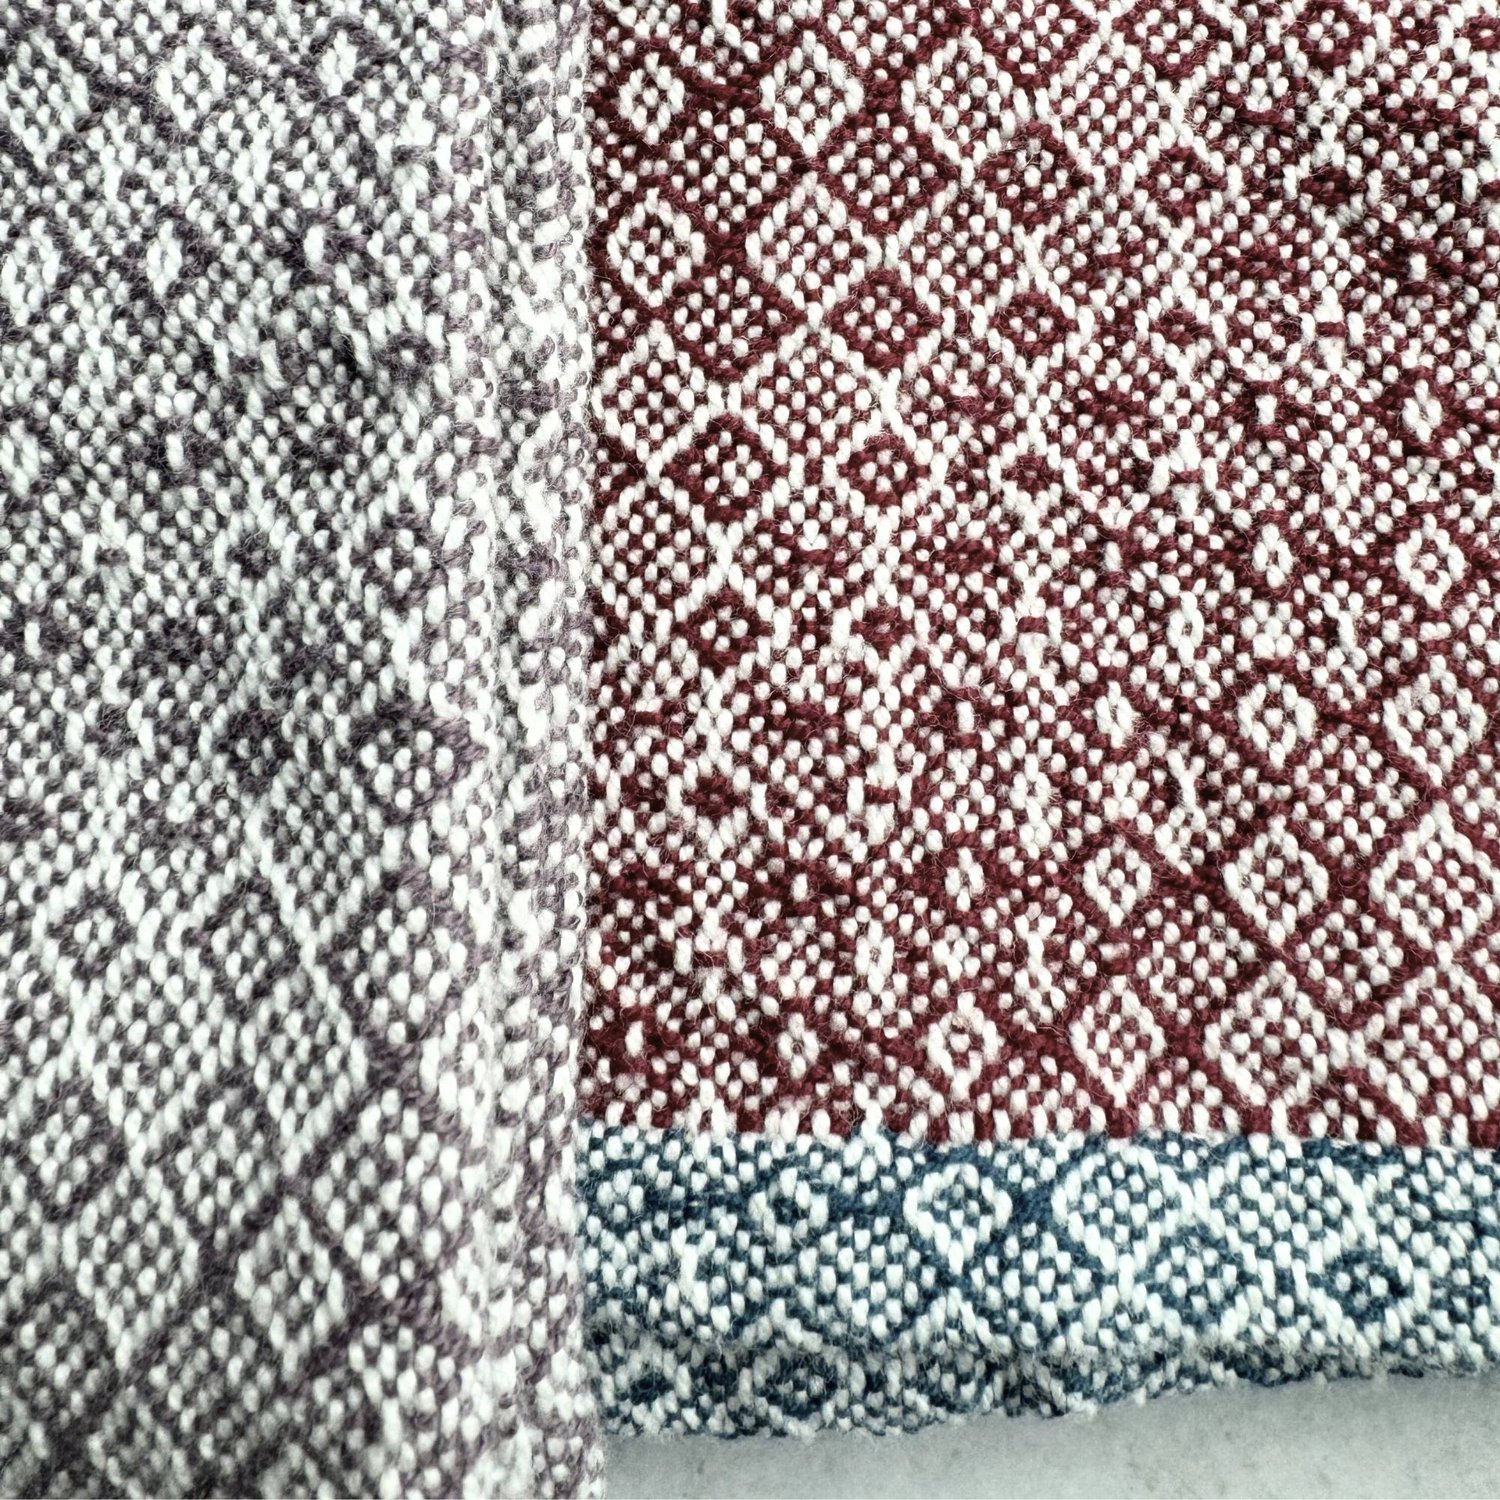 Handwoven dish towels in an advancing twill pattern. one towel is grey and white, the other is wine an white with a teal hem. Shot is a closeup with a slate grey background.